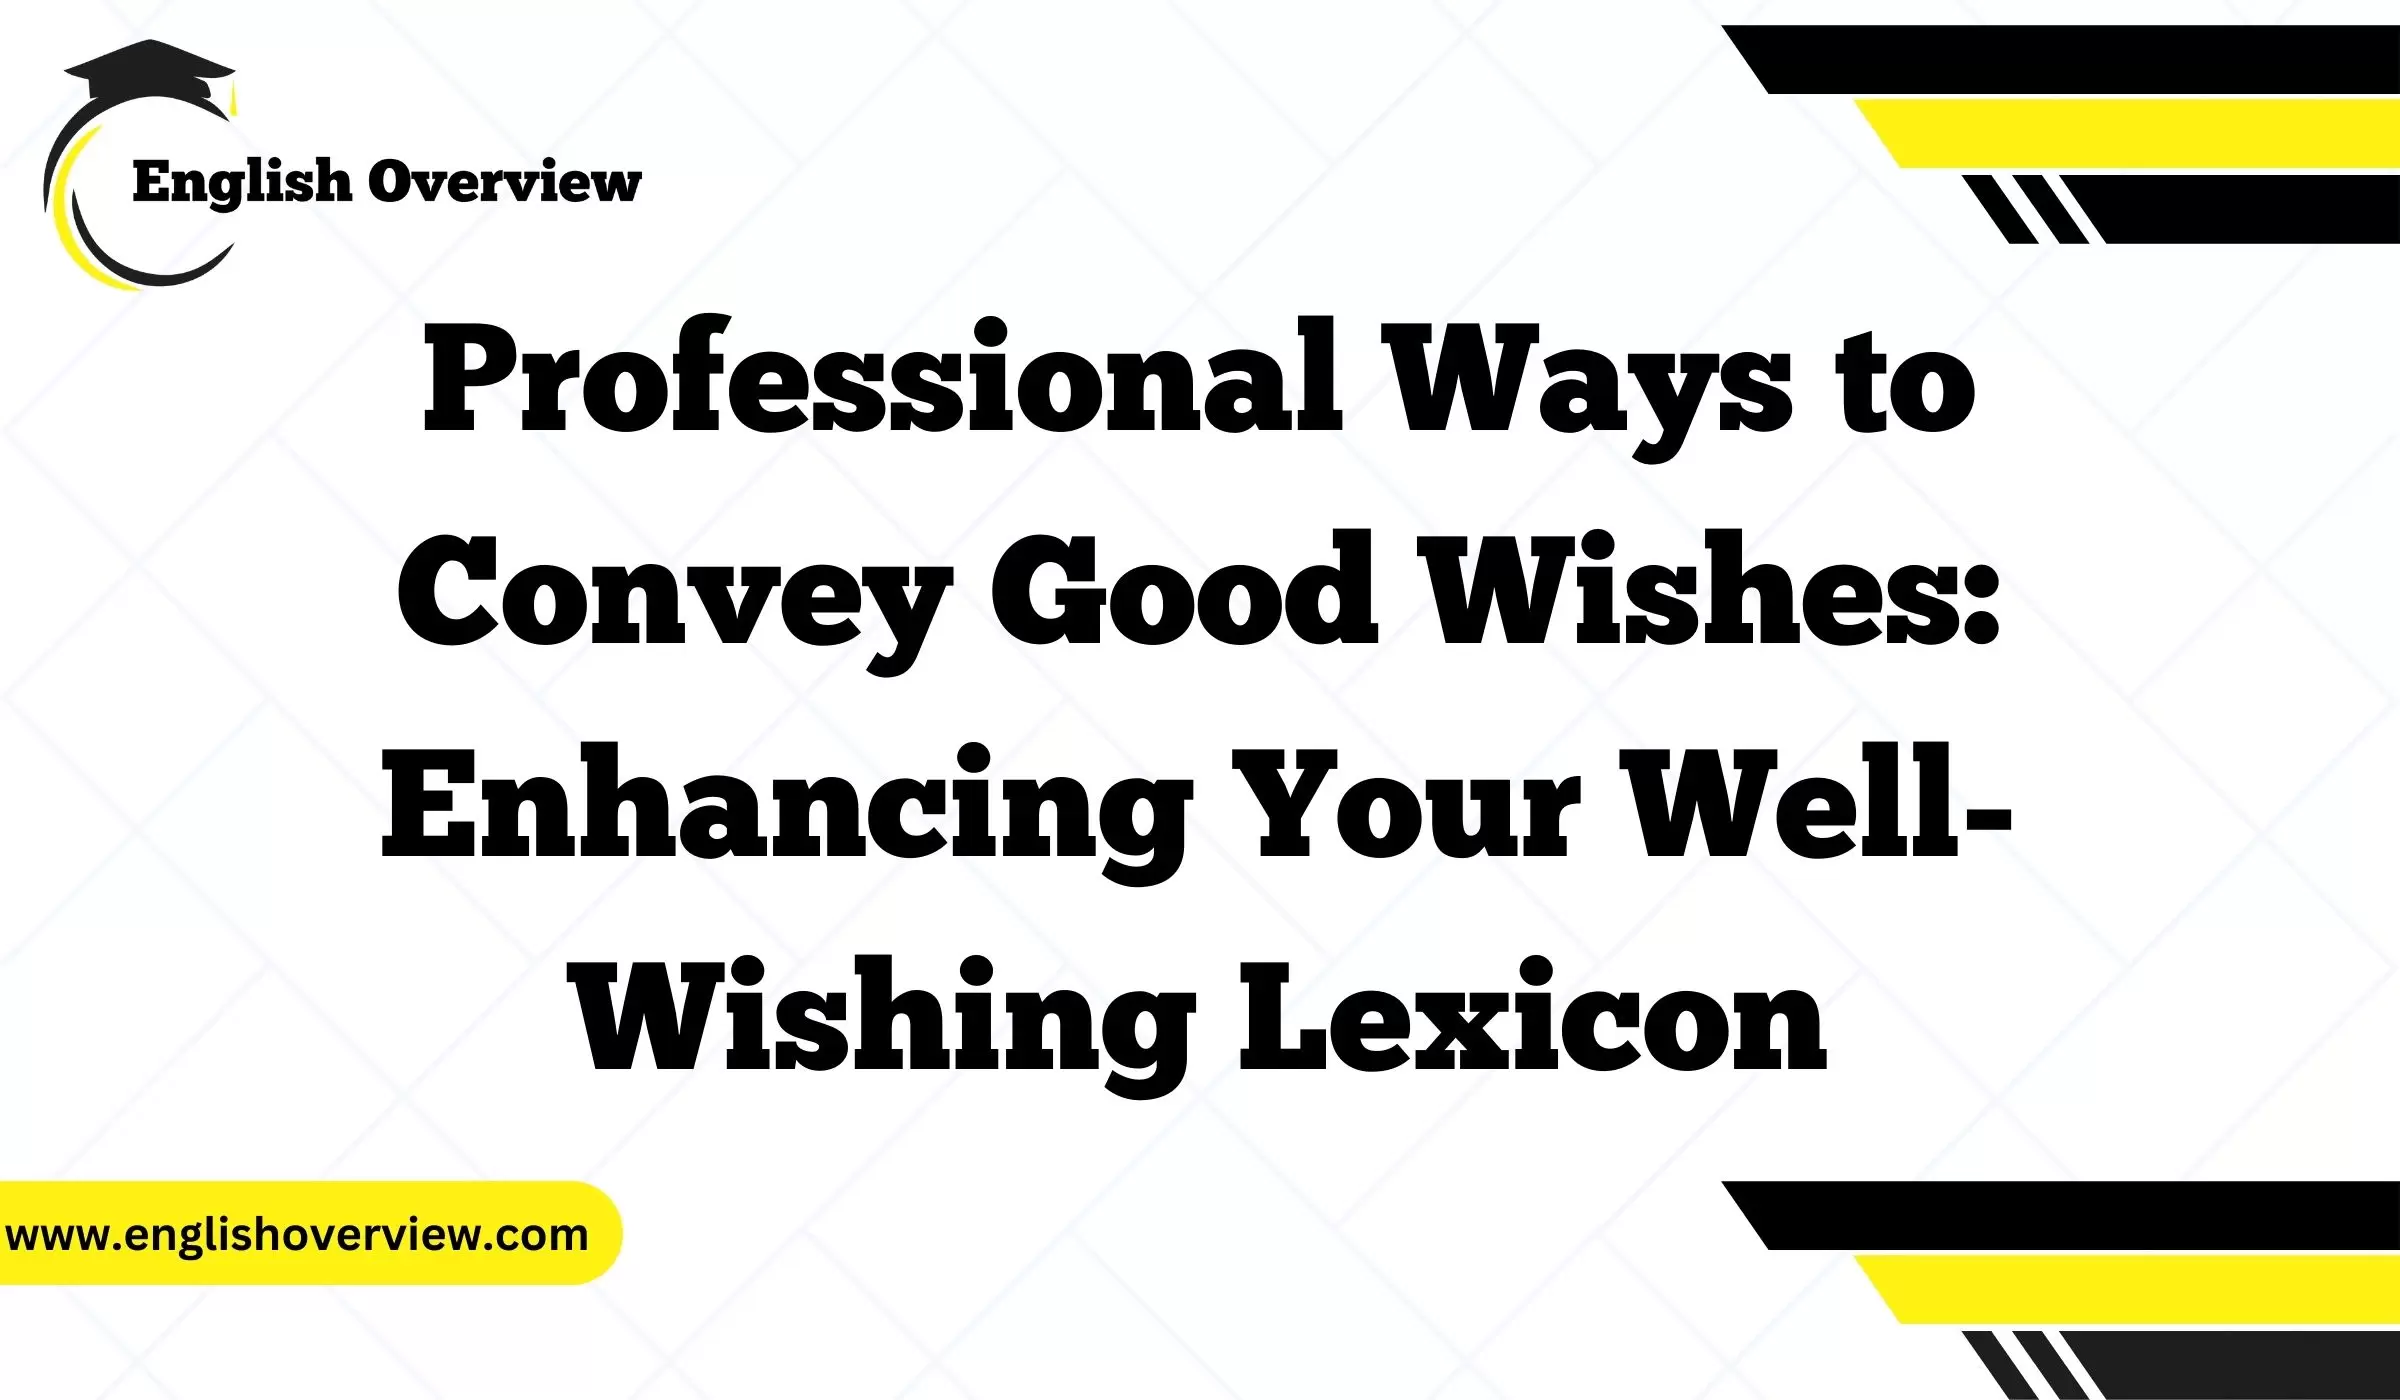 Professional Ways to Convey Good Wishes: Enhancing Your Well-Wishing Lexicon